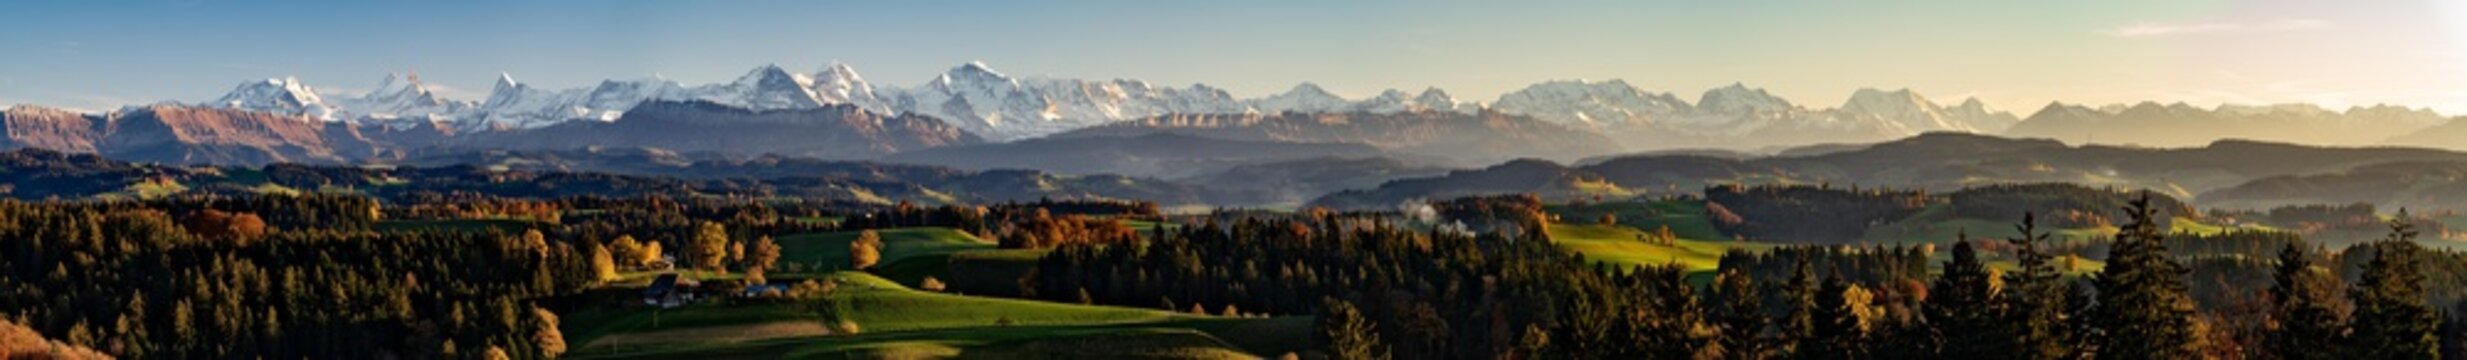 Golden panoramic view of the Emmental and Bernese Alps